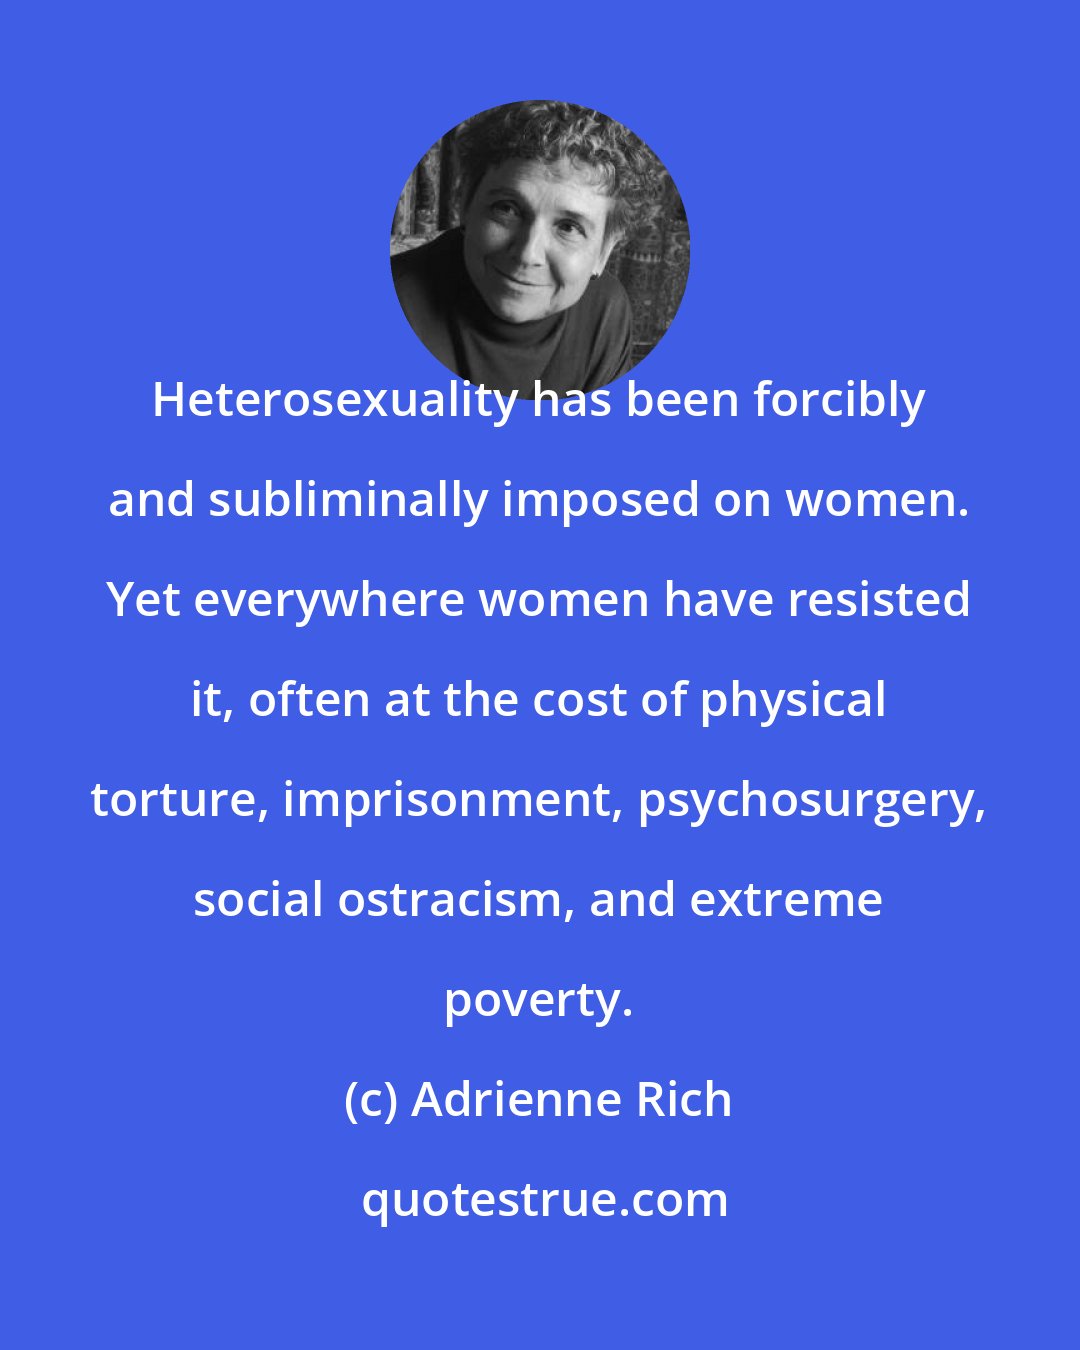 Adrienne Rich: Heterosexuality has been forcibly and subliminally imposed on women. Yet everywhere women have resisted it, often at the cost of physical torture, imprisonment, psychosurgery, social ostracism, and extreme poverty.